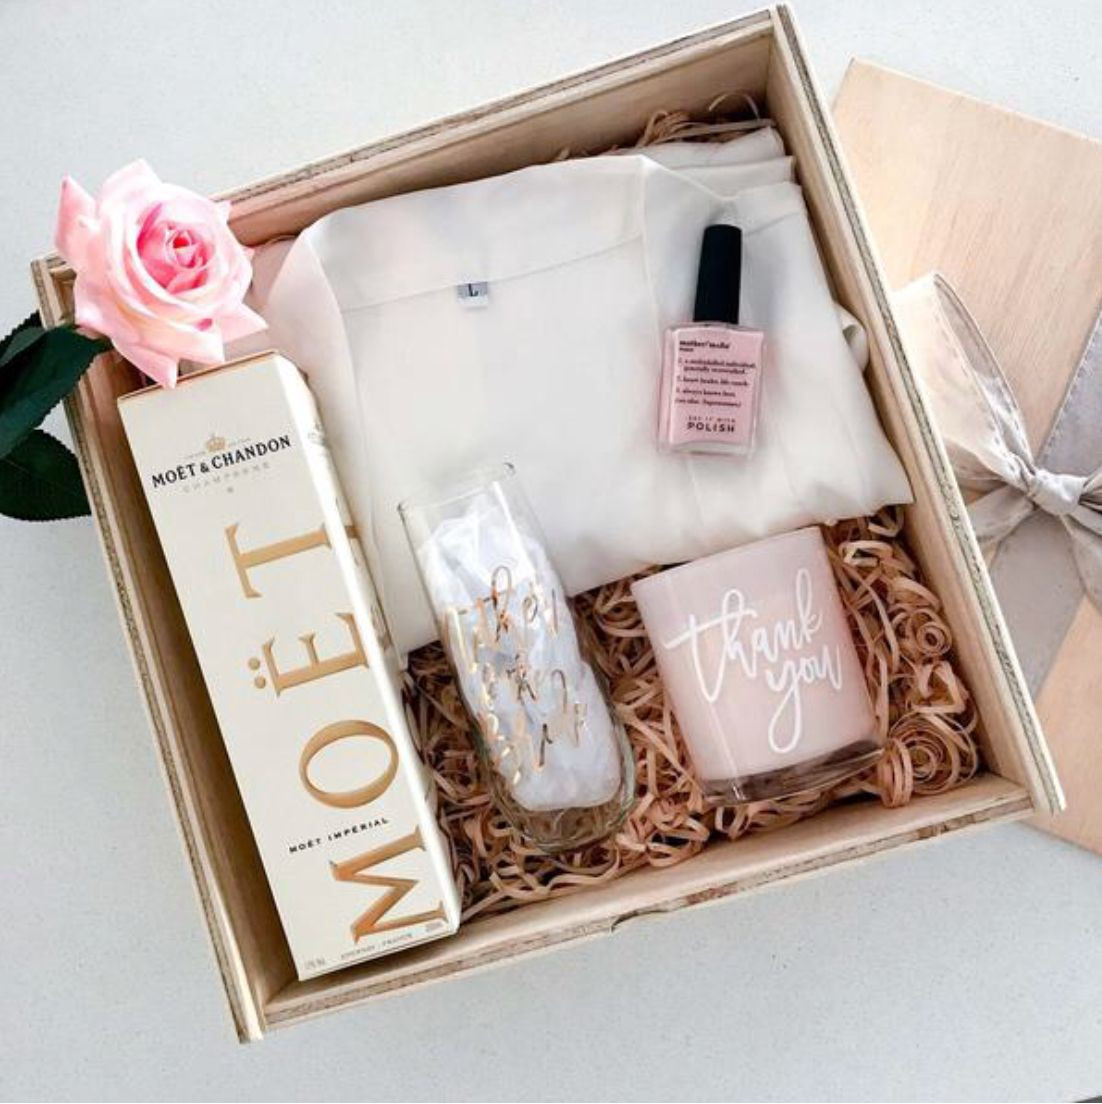 Bridal Shower Gift Ideas From Mother Of The Bride
 Mother of the bride hamper